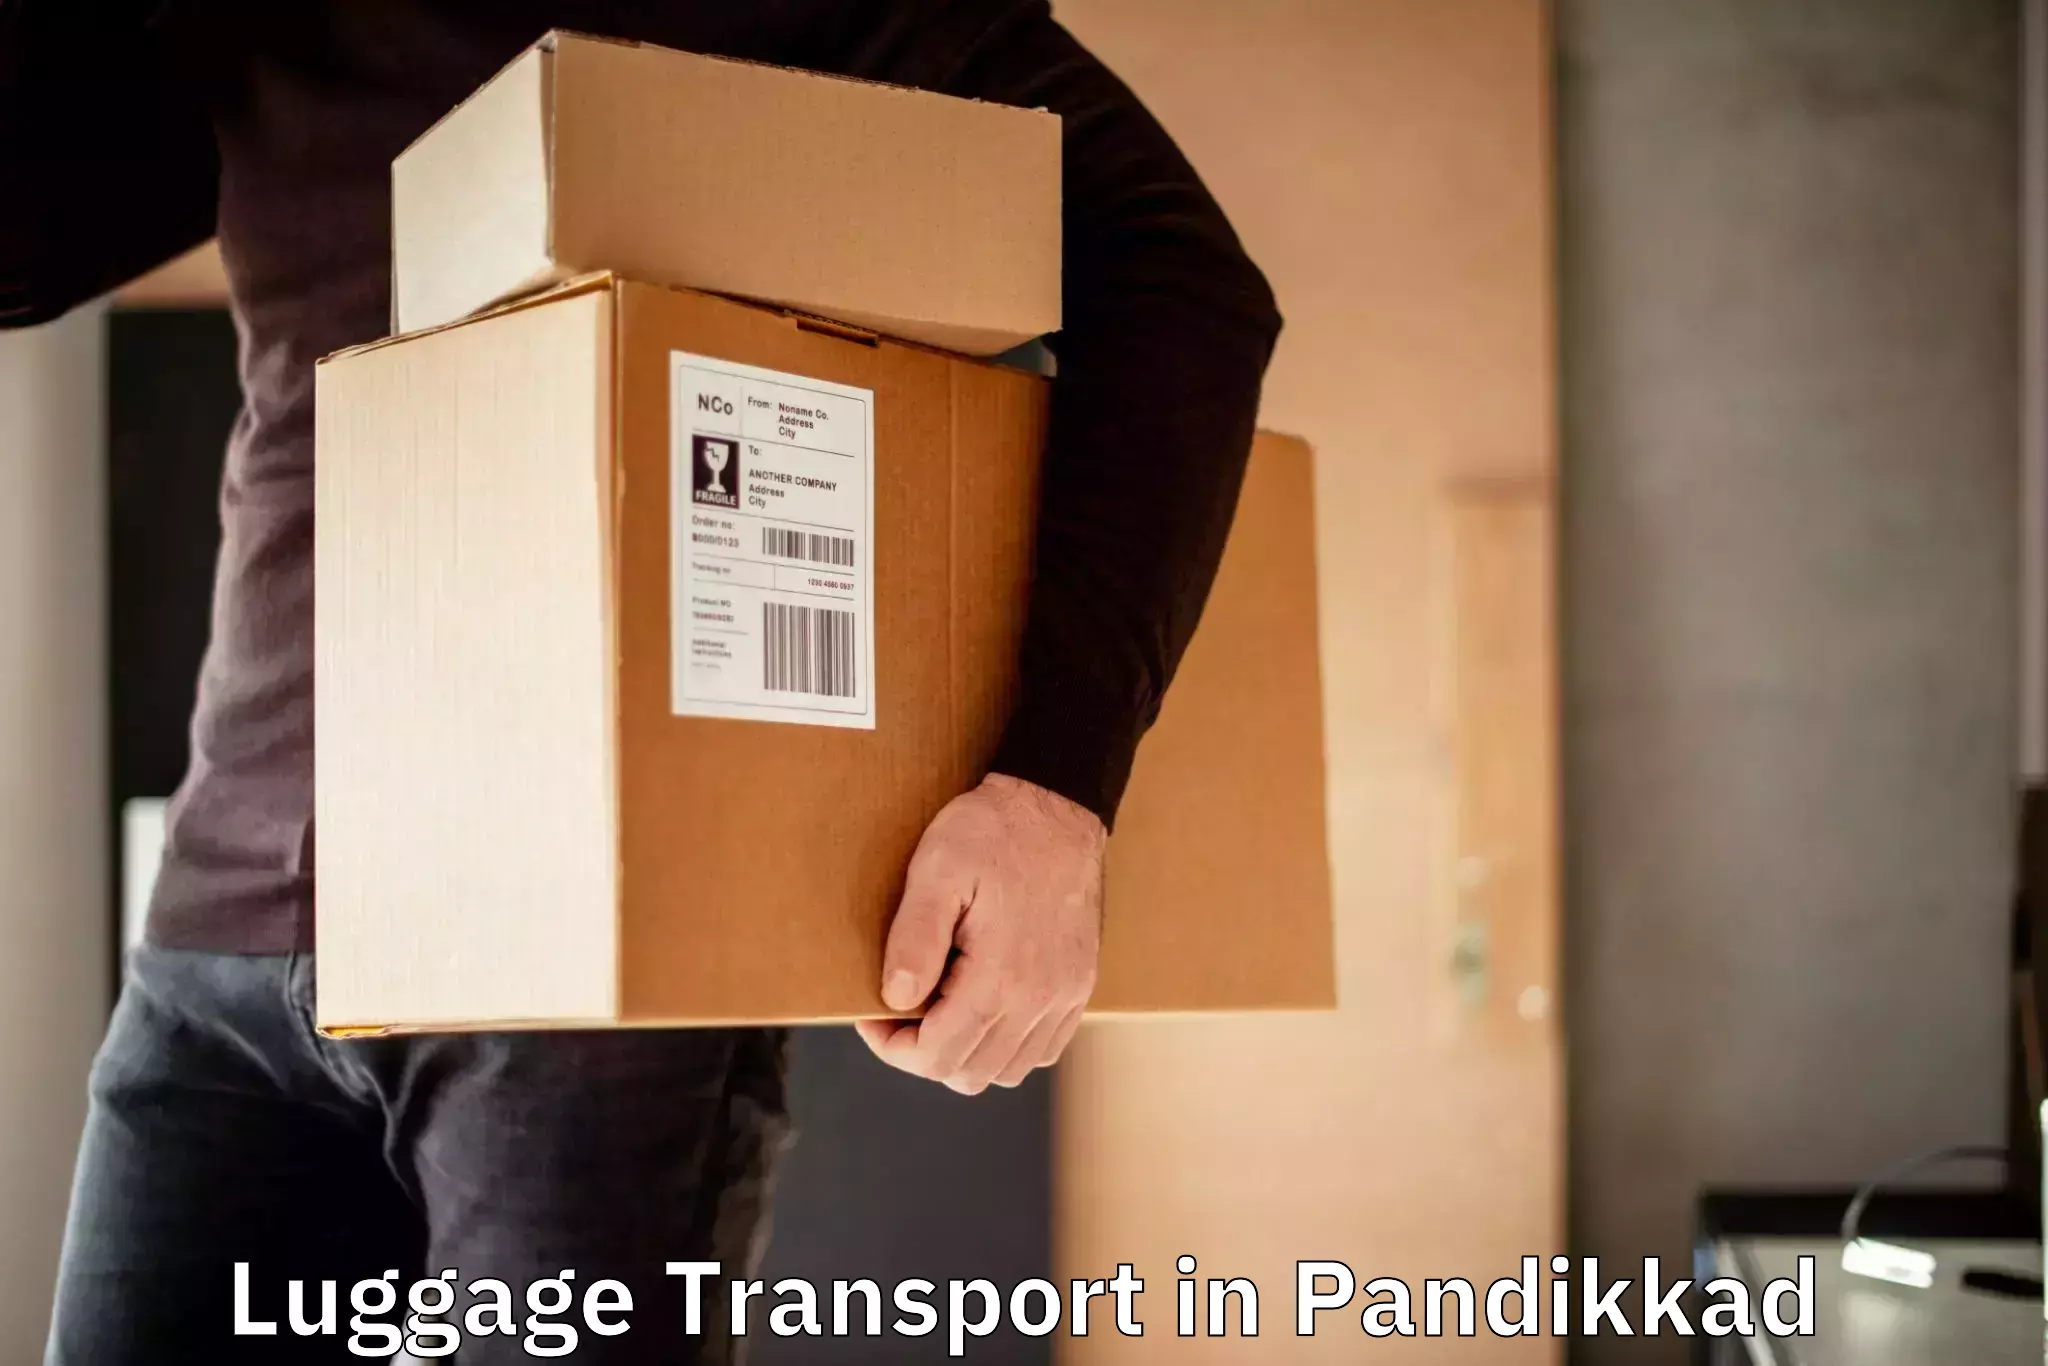 Luggage delivery news in Pandikkad